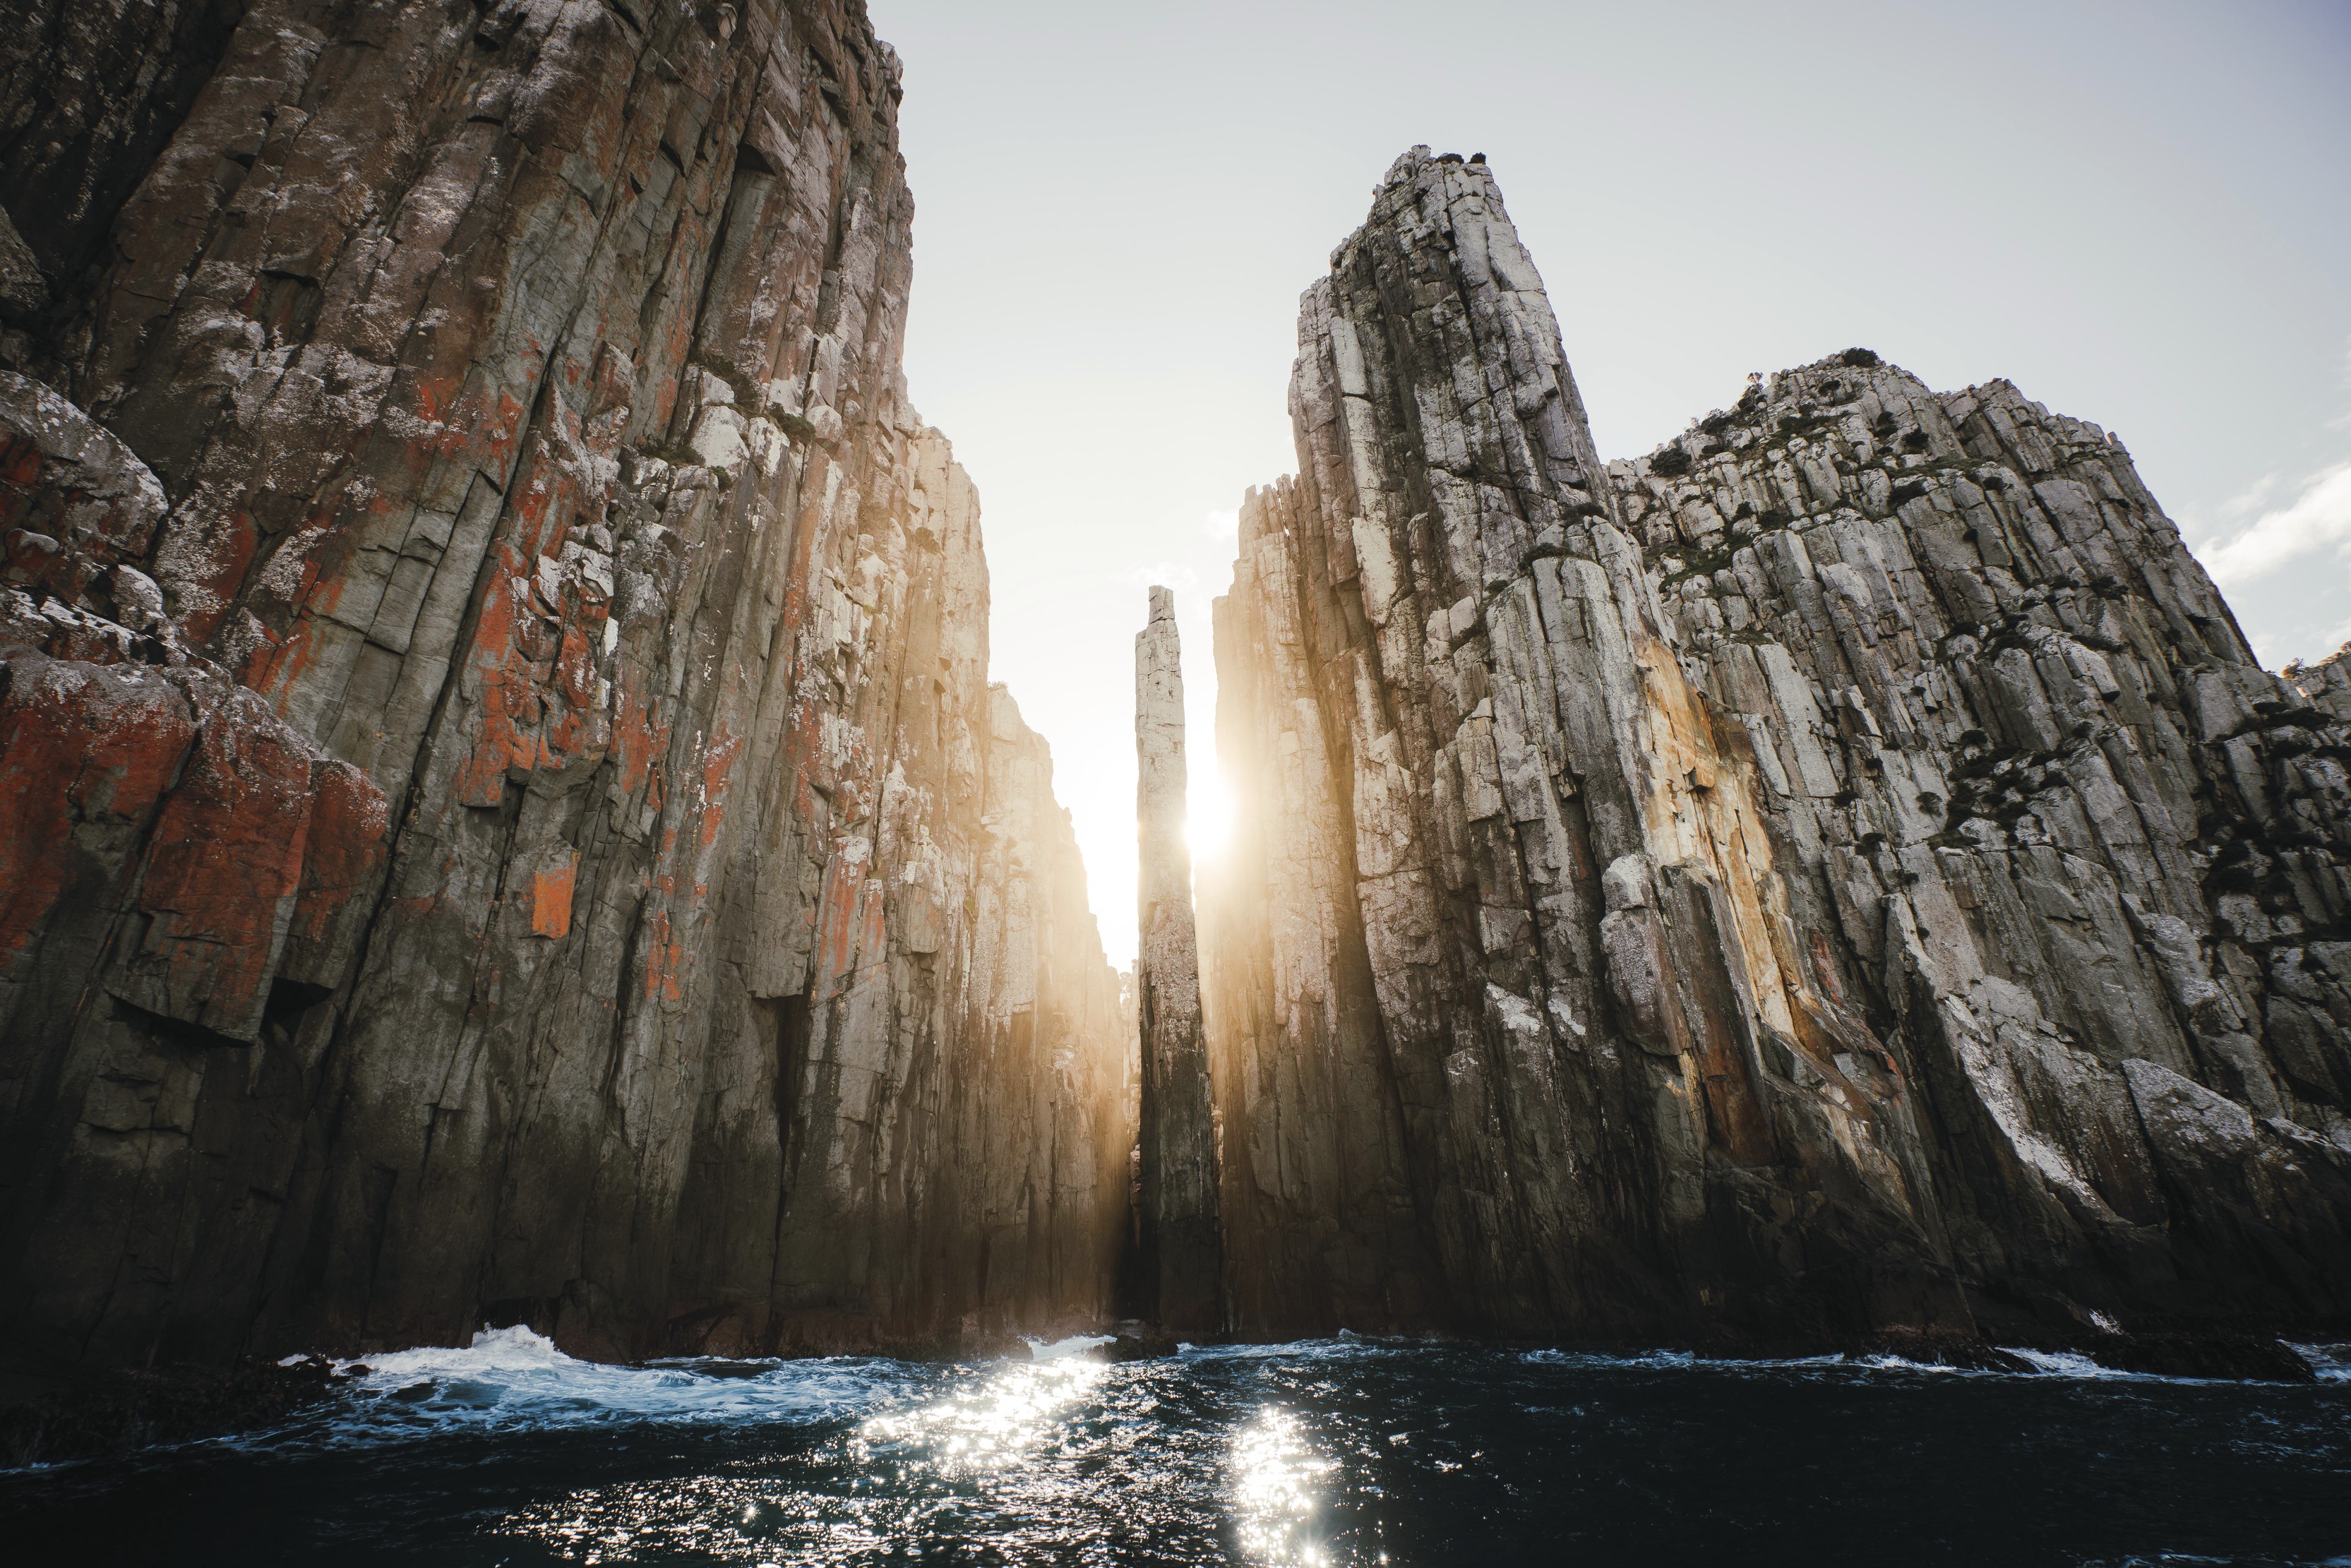 Breathtaking image of the Candlestick, taken from the ocean. Surrounded by tall rock walls and striking blue ocean as the sun peaks just the rocks.